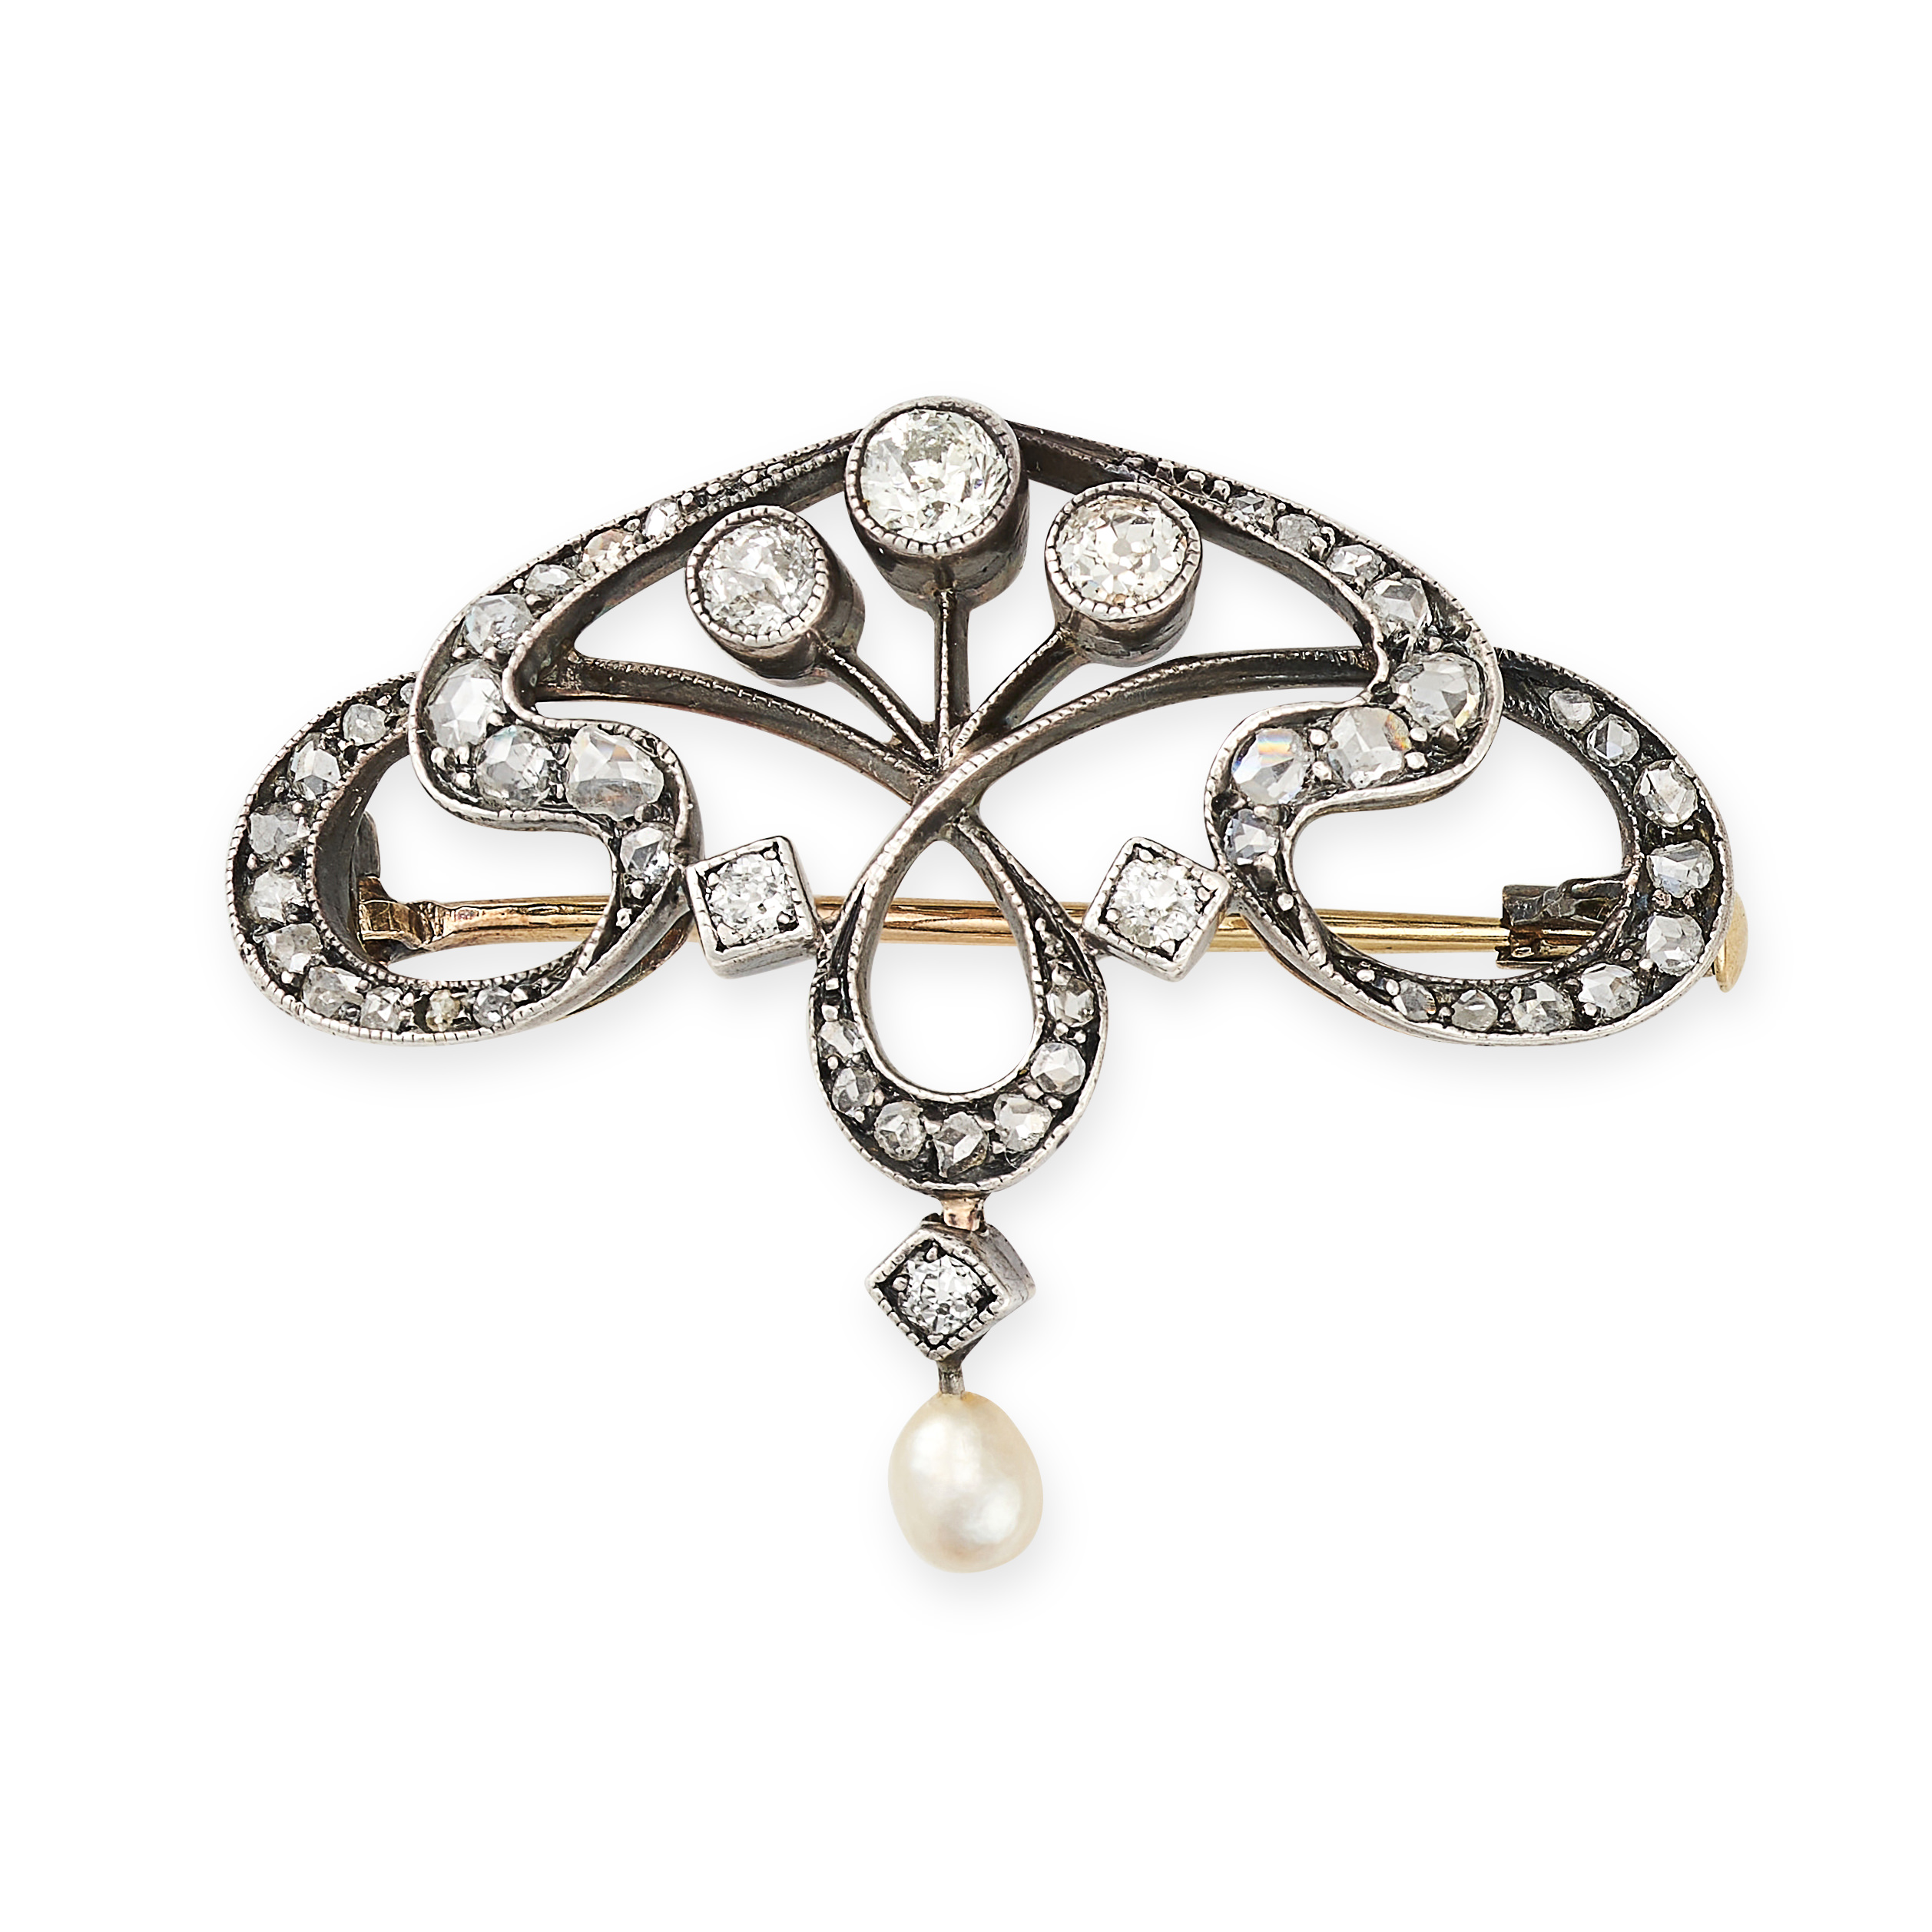 AN ANTIQUE BELLE EPOQUE DIAMOND AND PEARL BROOCH / PENDANT in silver and yellow gold, set with ol...